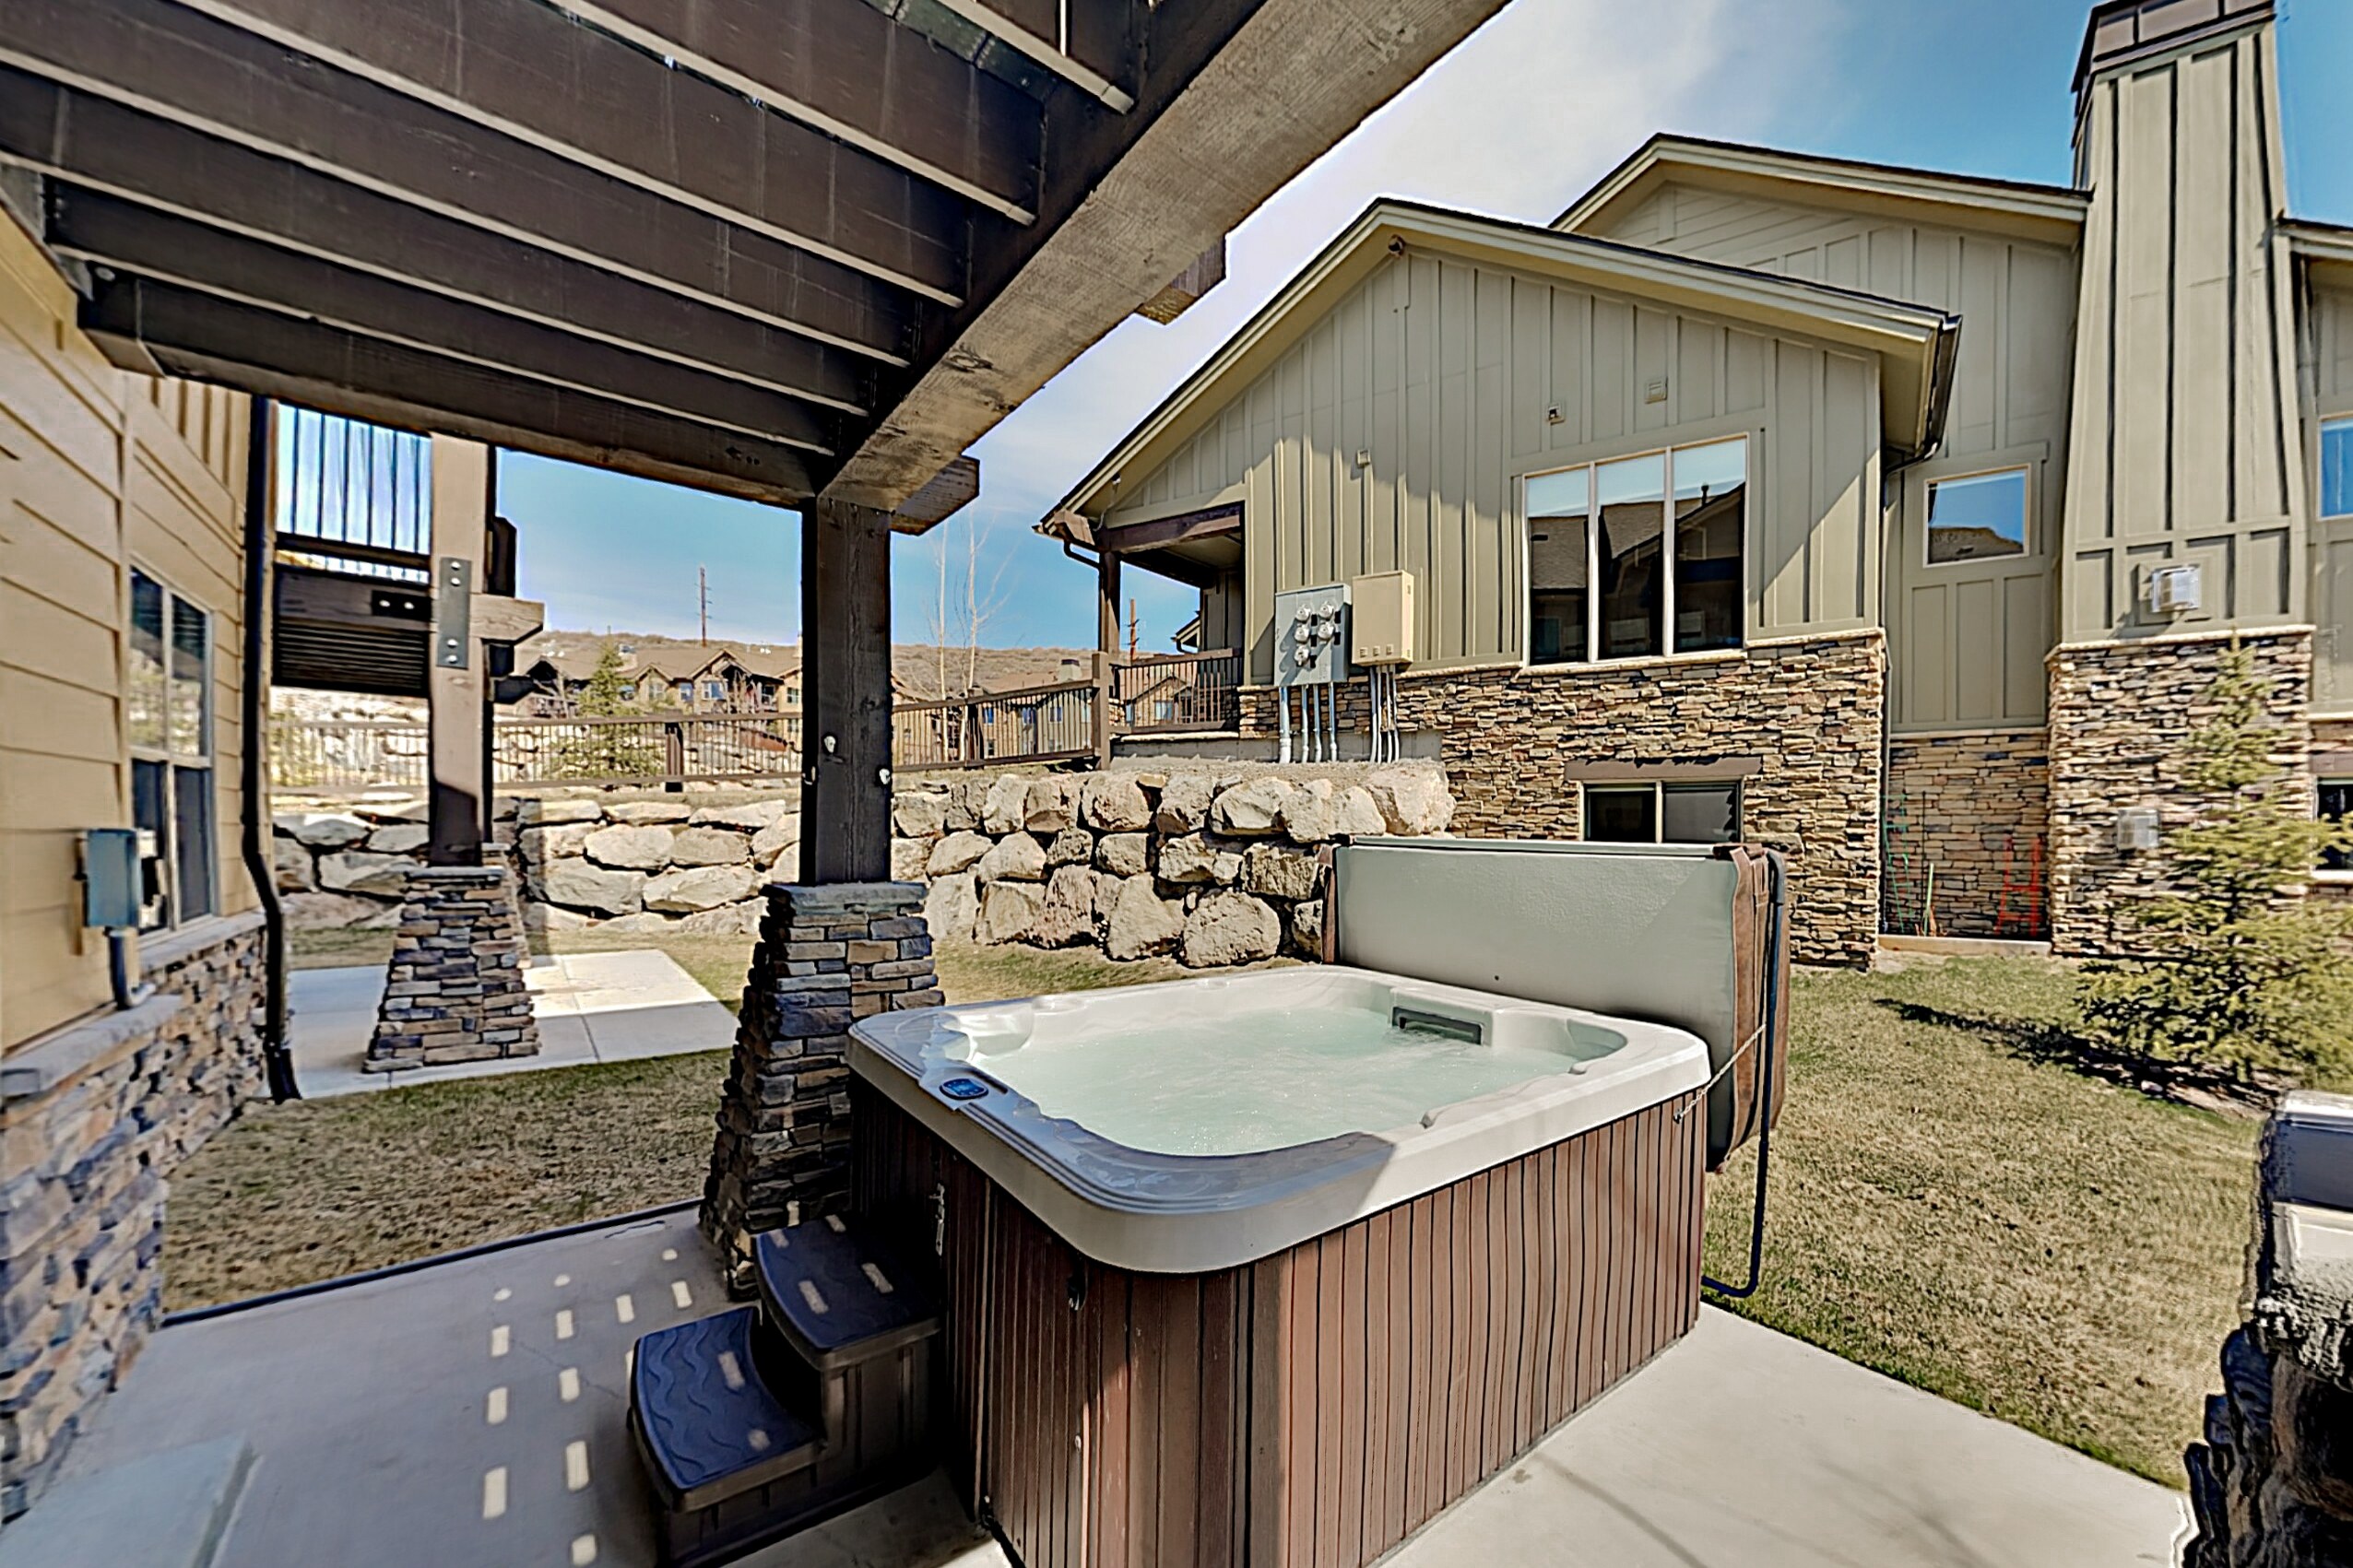 After a day on the mountain, take a dip in the private 6-person hot tub.